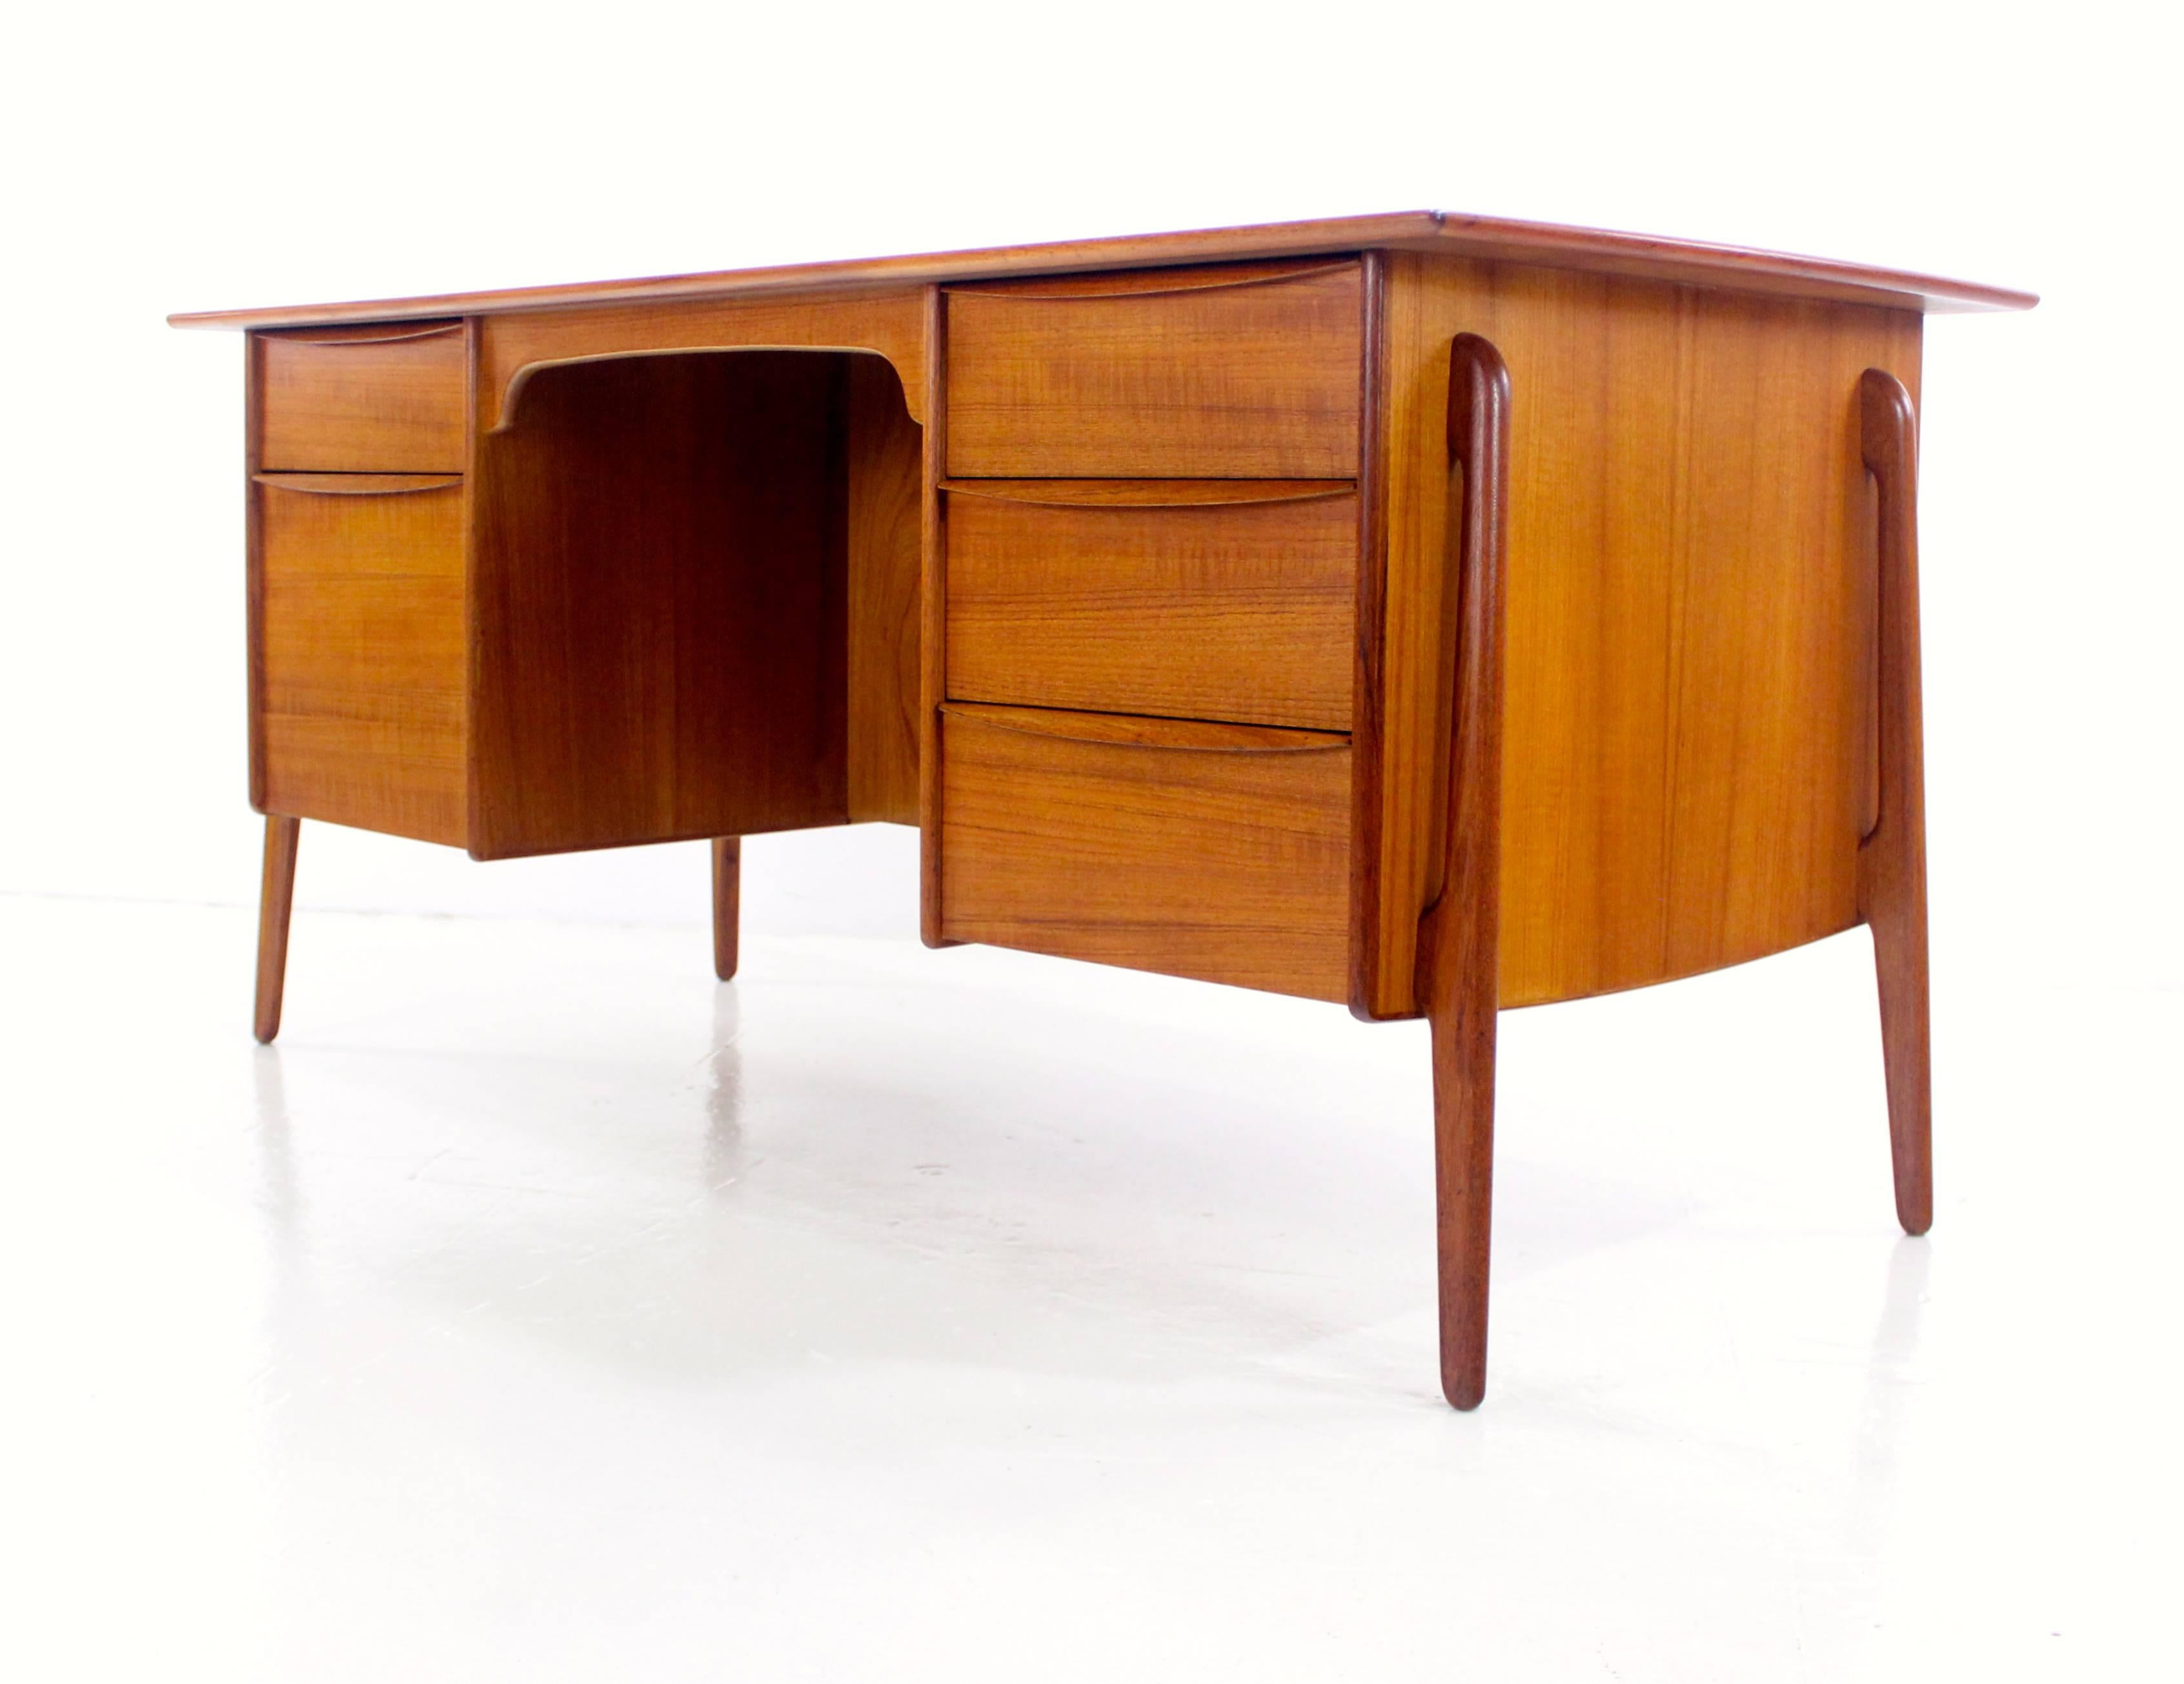 Danish modern executive desk with superlative style and craftsmanship designed by Svend Madsen.
Richly grained teak.
Distinctive lines and unique curved leg configuration.
Three drawers on the right, two drawers on the left, bottom is a file